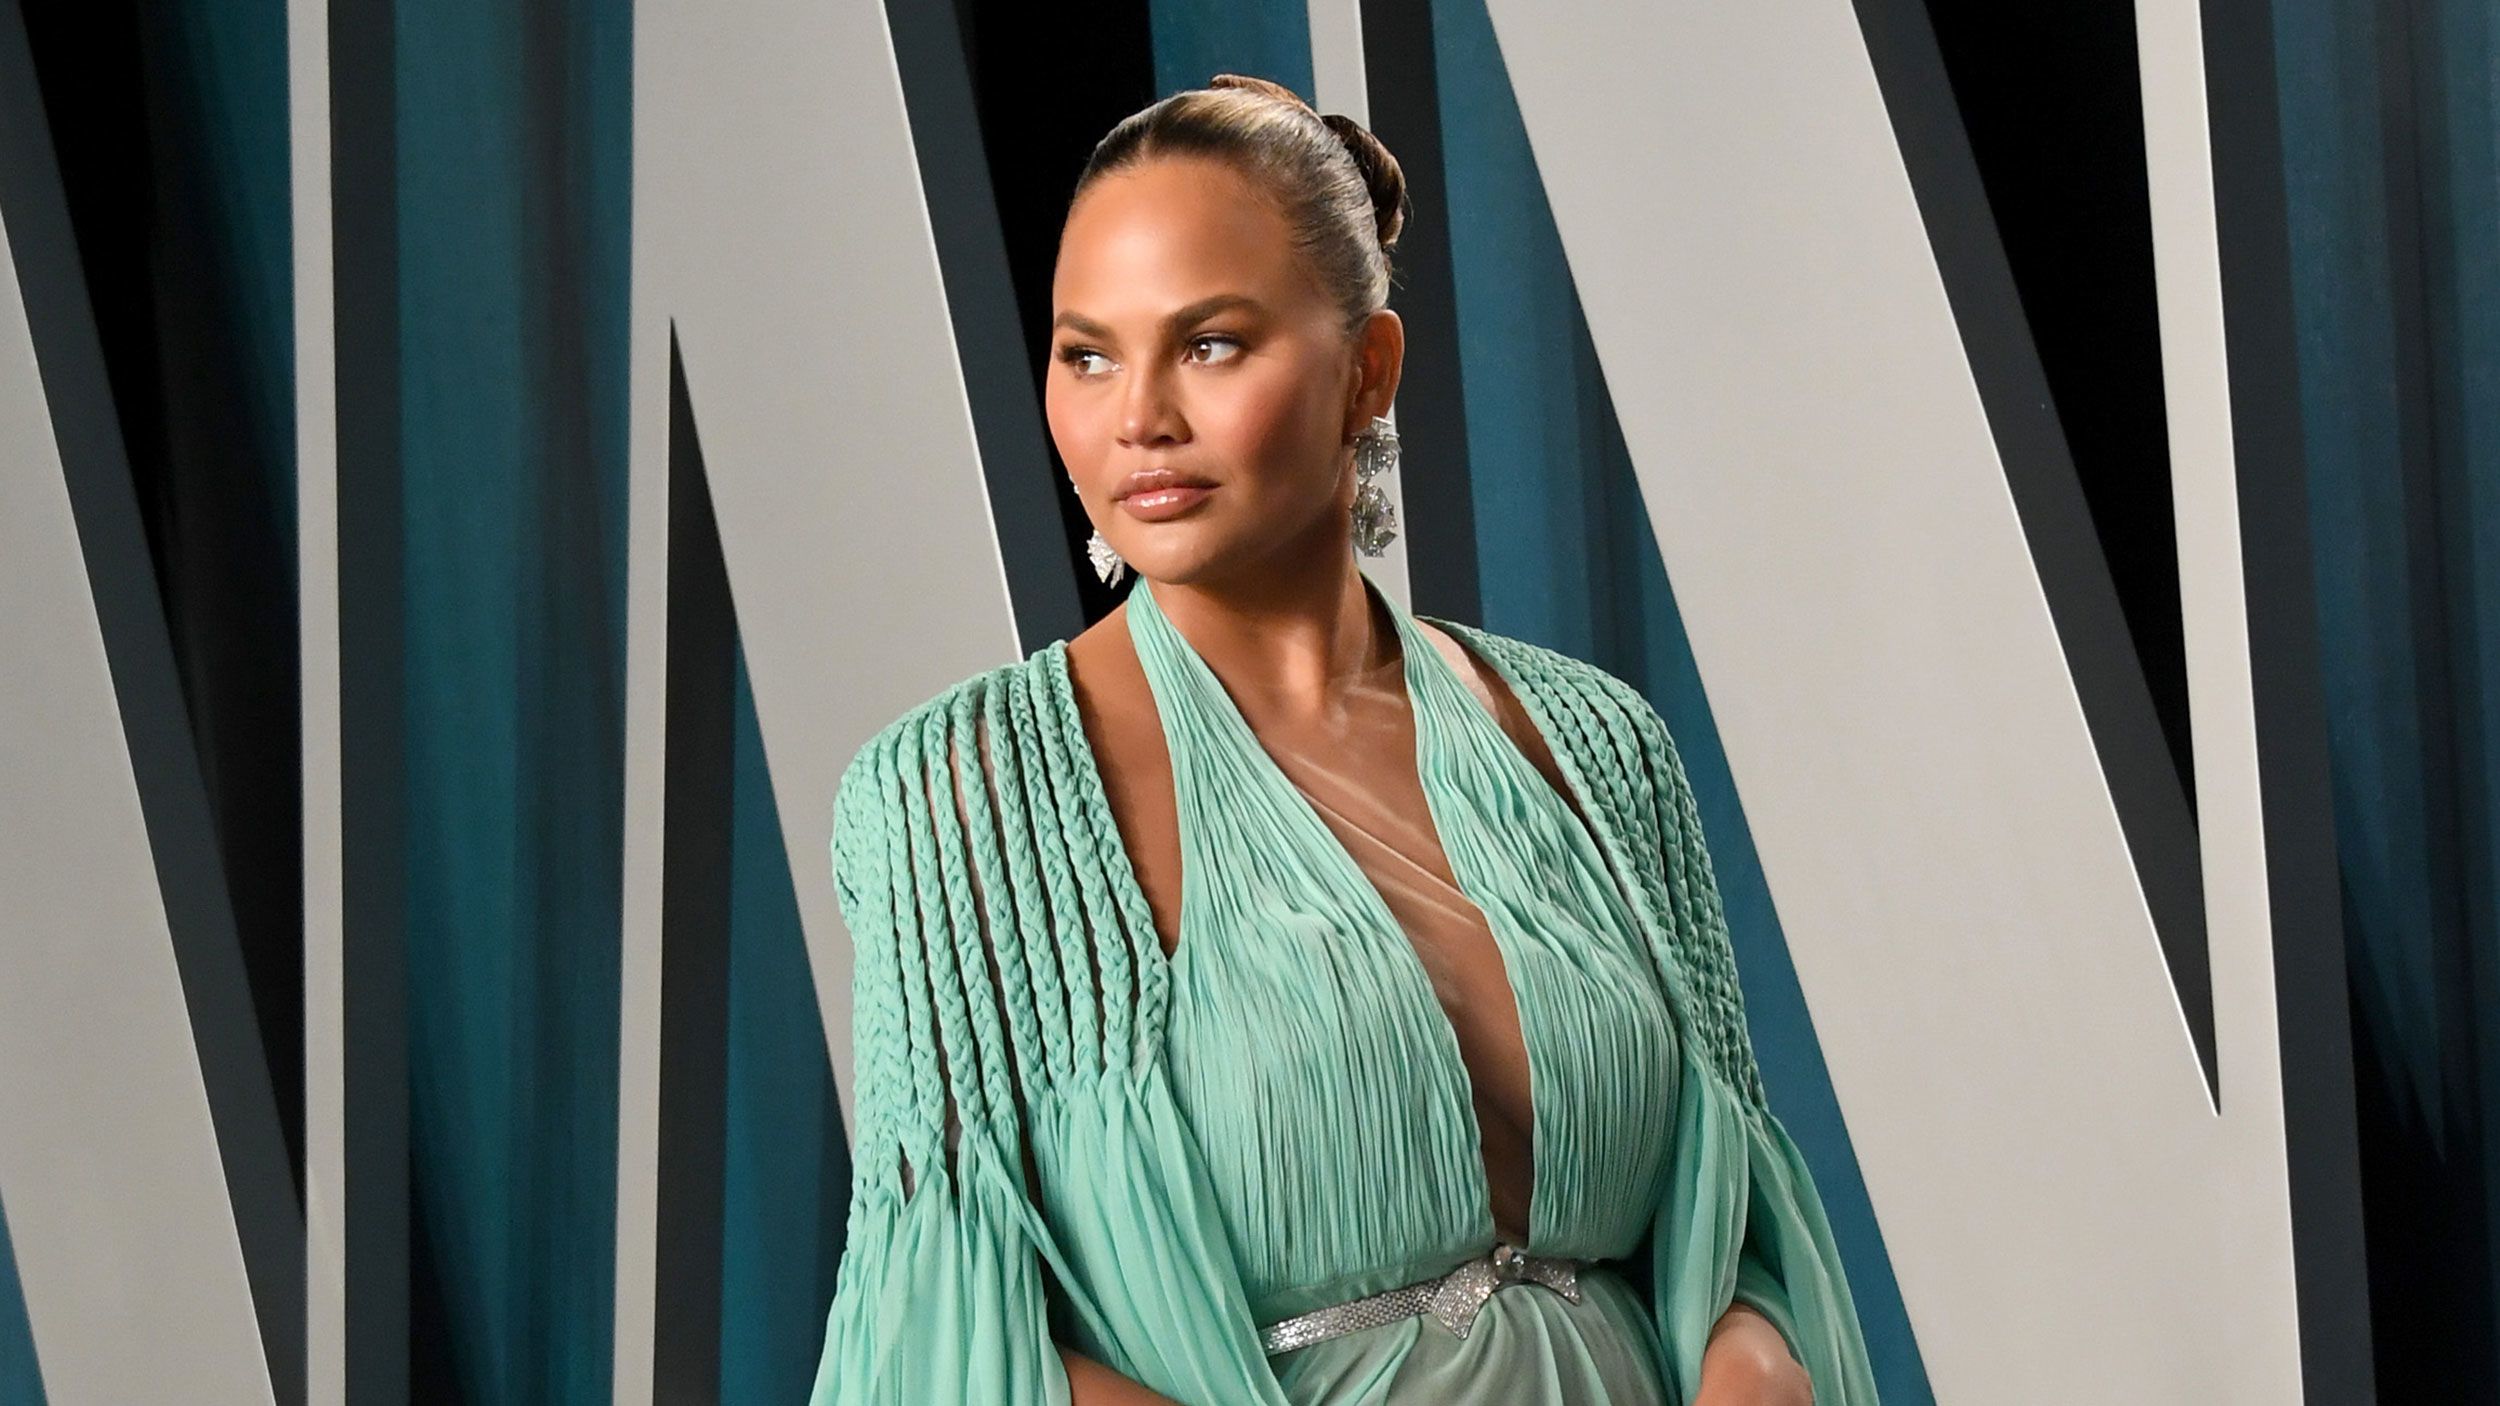 Chrissy Teigen says her 2020 miscarriage was an abortion